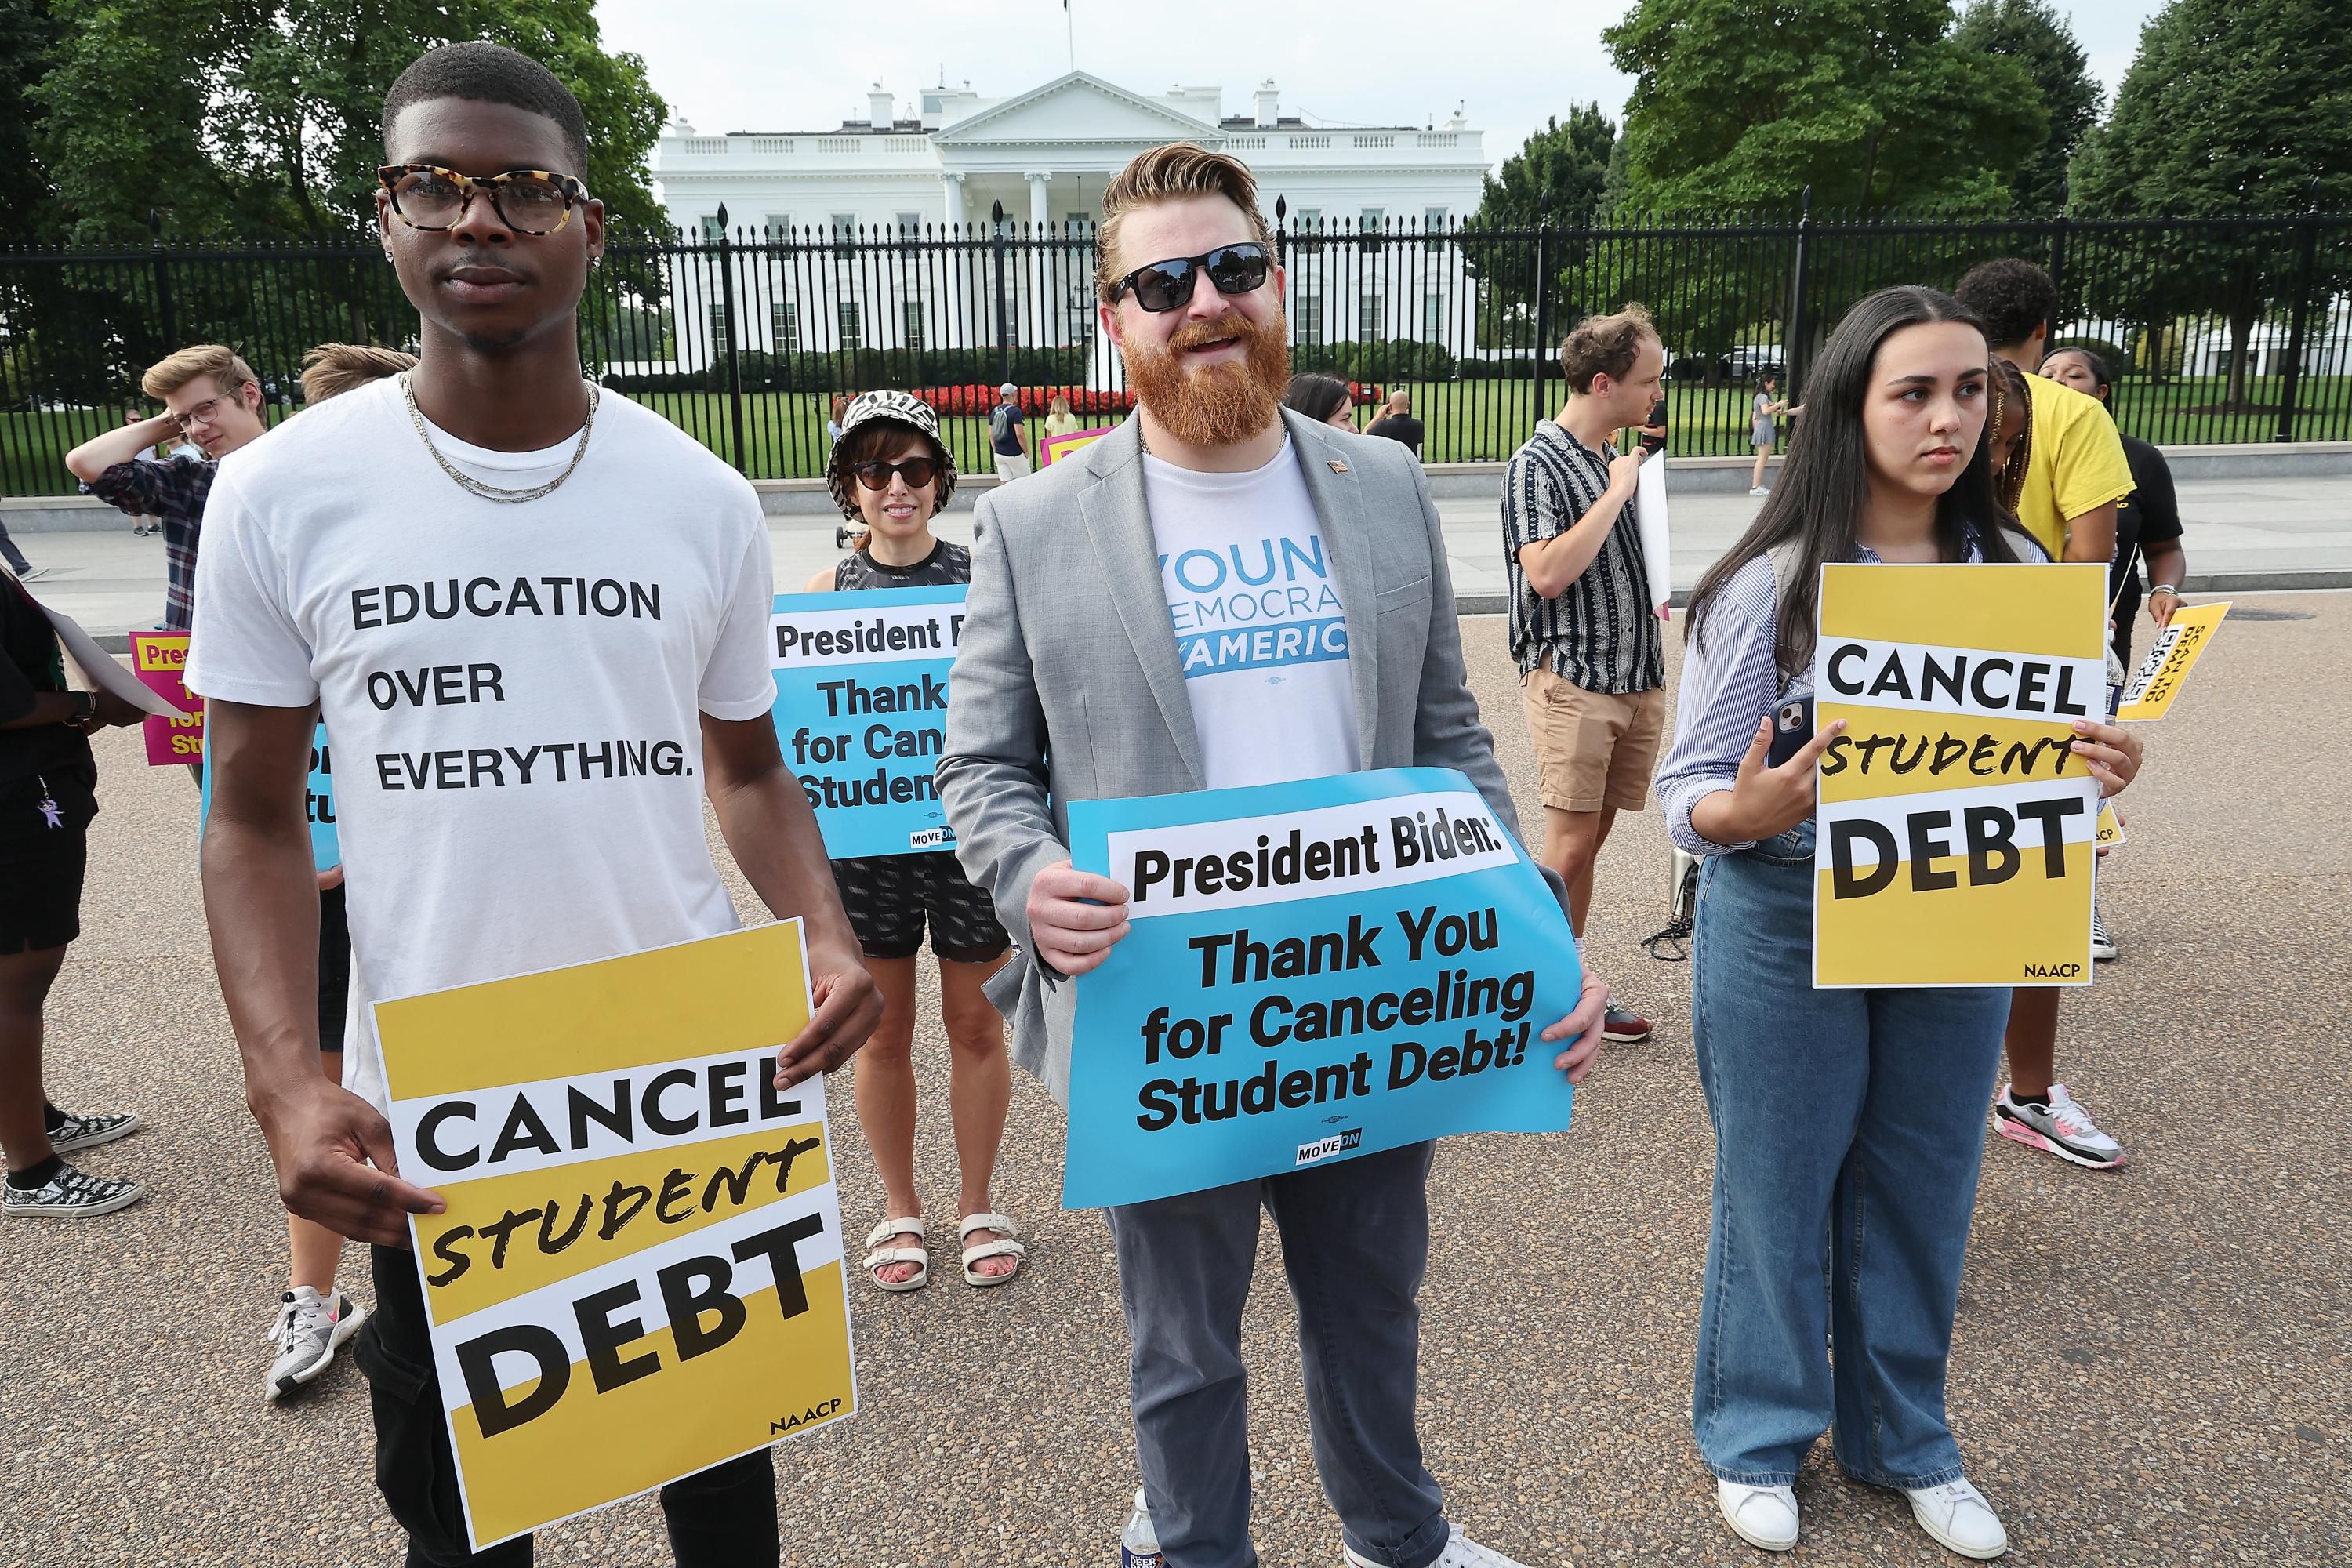 Student borrowers rally in support of debt relief